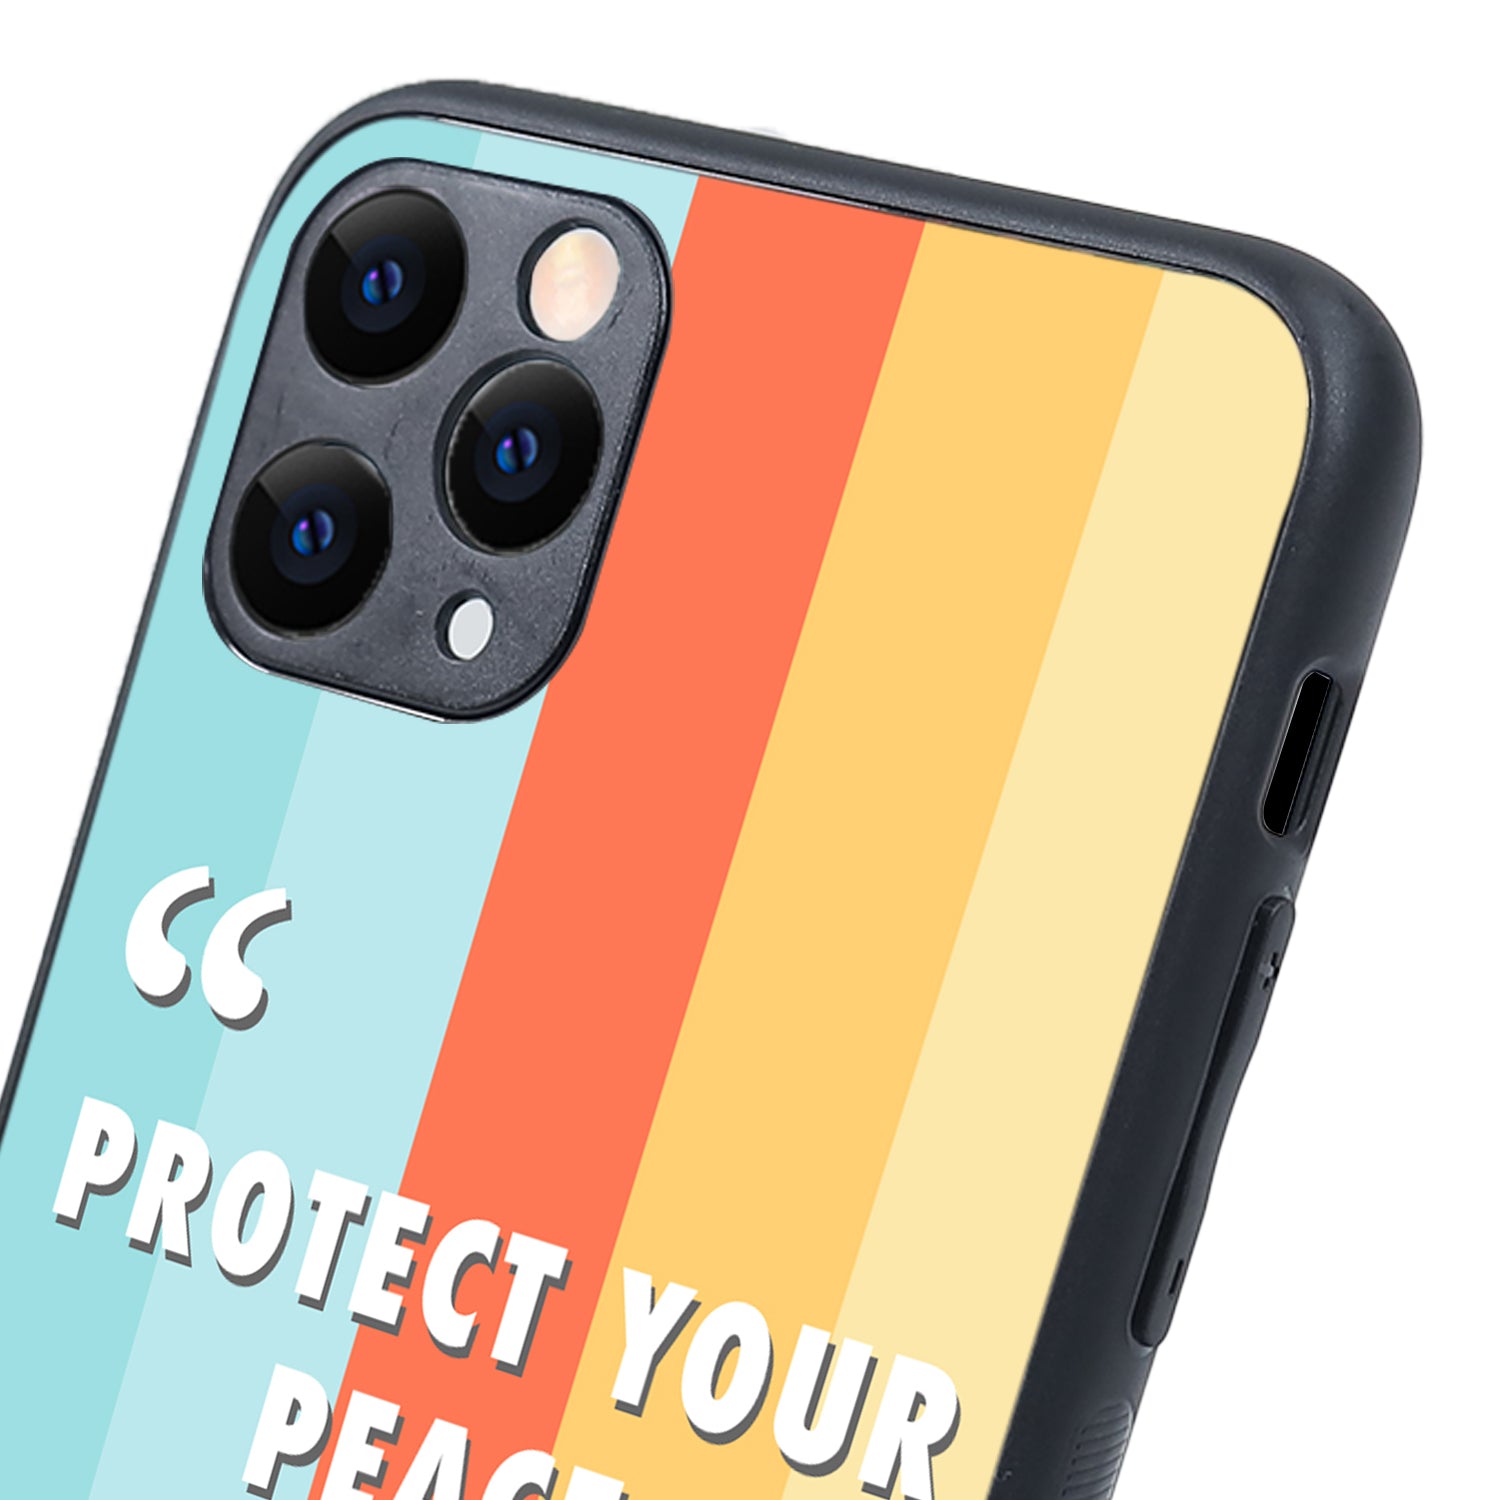 Protect your peace Motivational Quotes iPhone 11 Pro Max Case